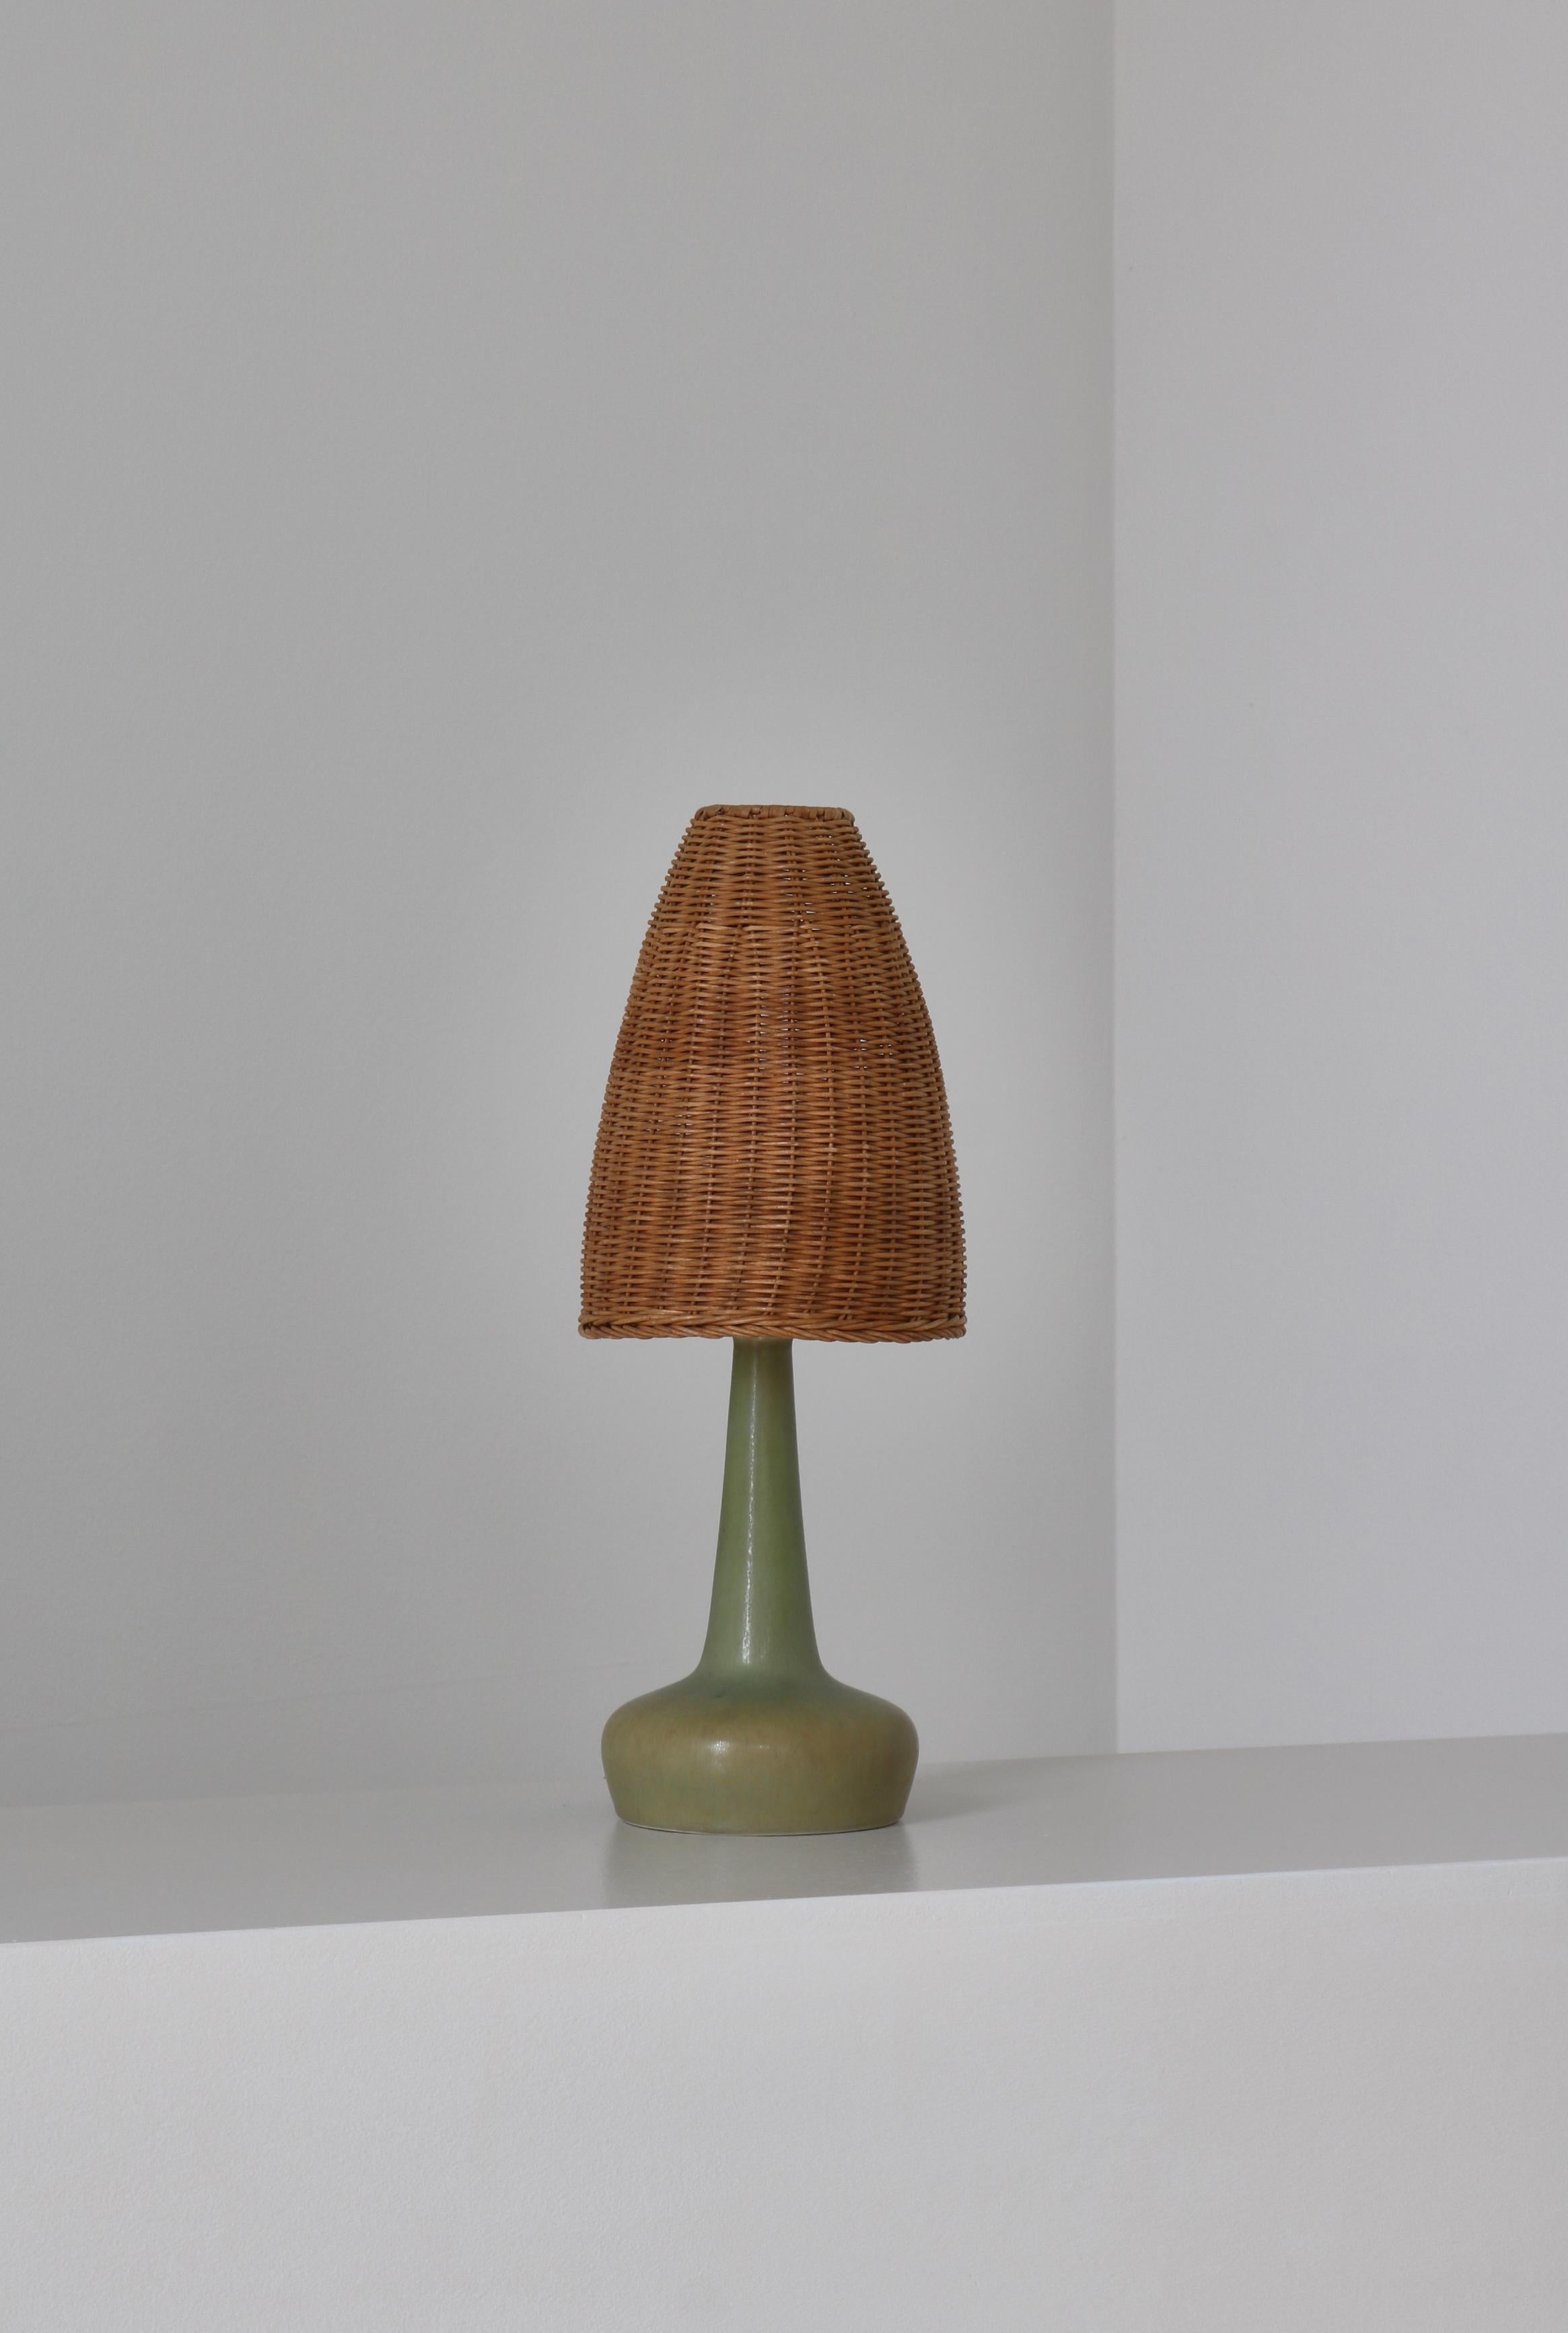 Wonderful table lamp model no. 311 designed by Esben Klint in 1949 for Le Klint, Denmark. This stoneware edition was handmade at Palshus Stentøj, Copenhagen in the 1950s in commission for Le Klint. This one is decorated in the rare 